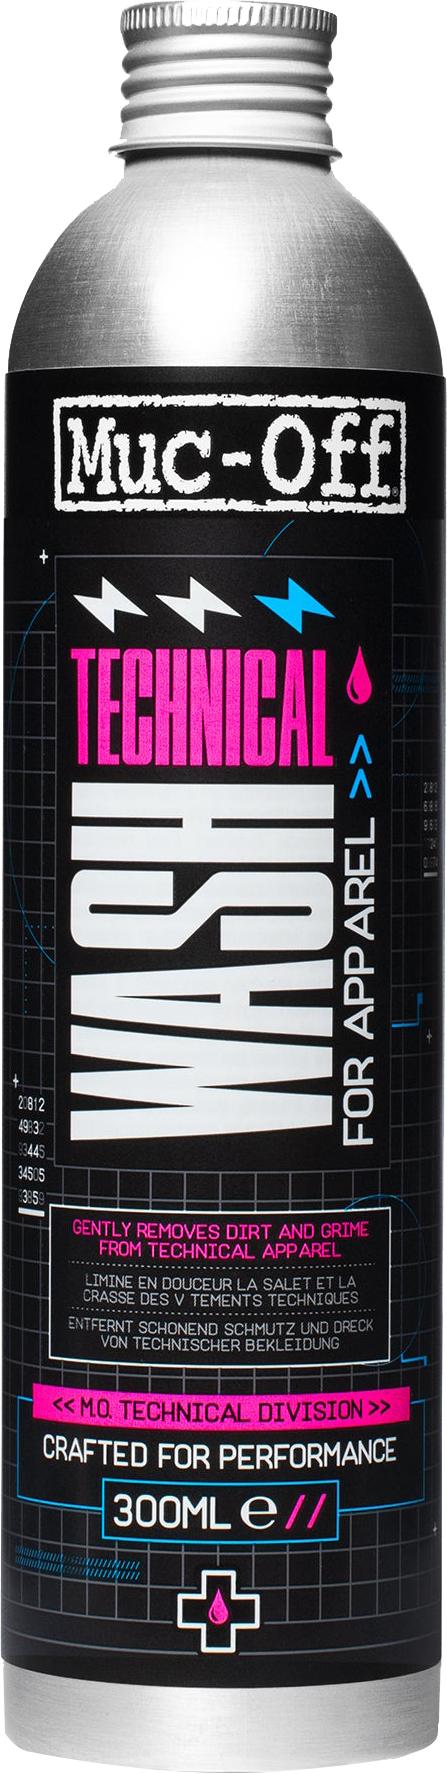 Muc-off Technical Wash (300ml) - Natural